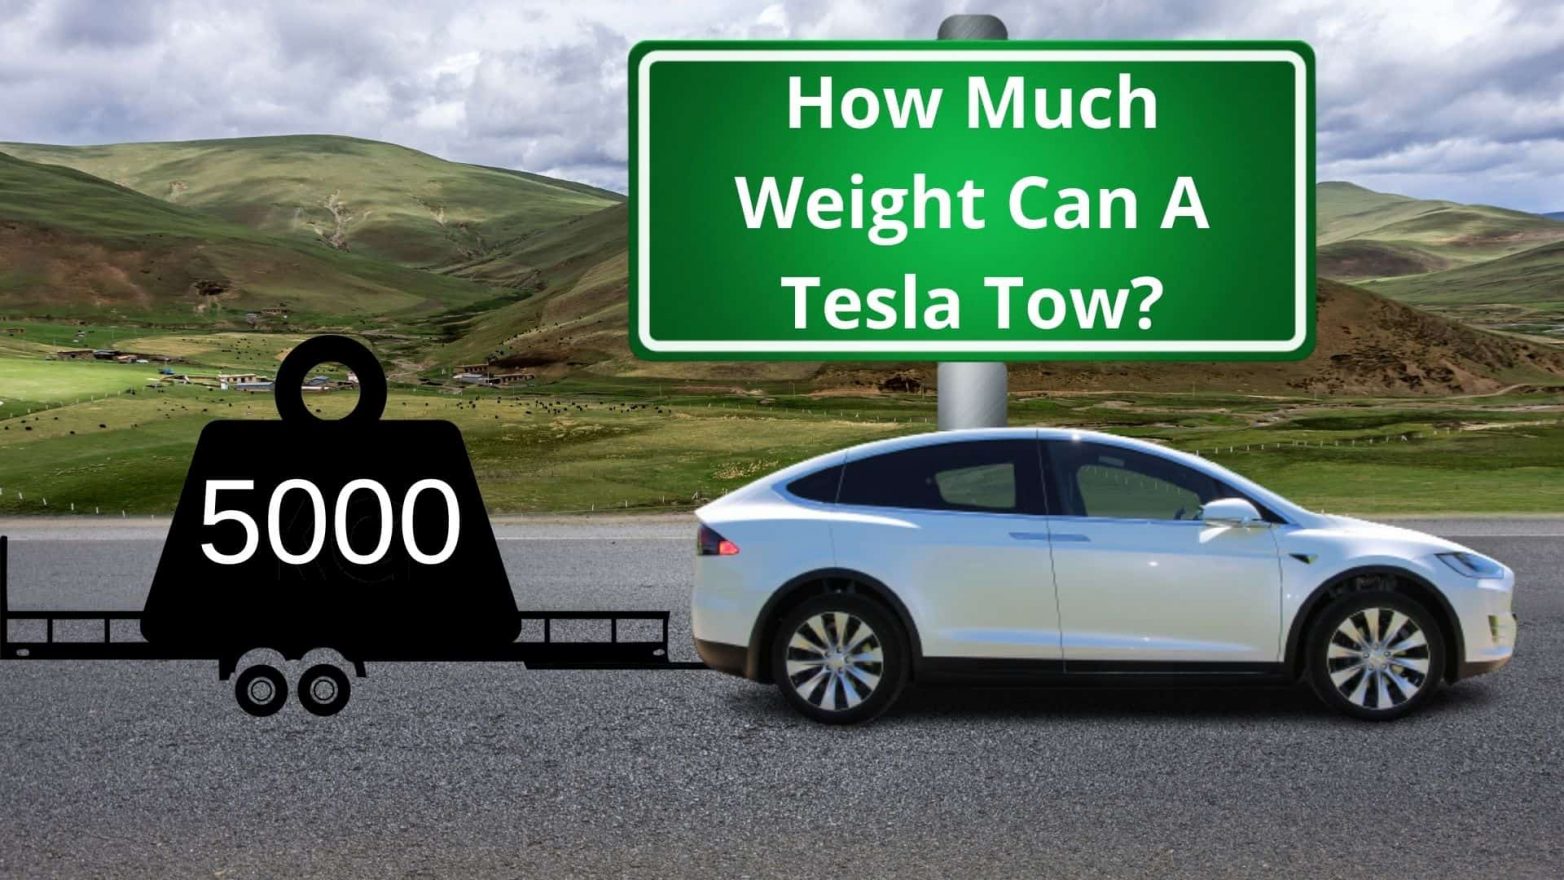 How Much Weight Can A Tesla Tow?